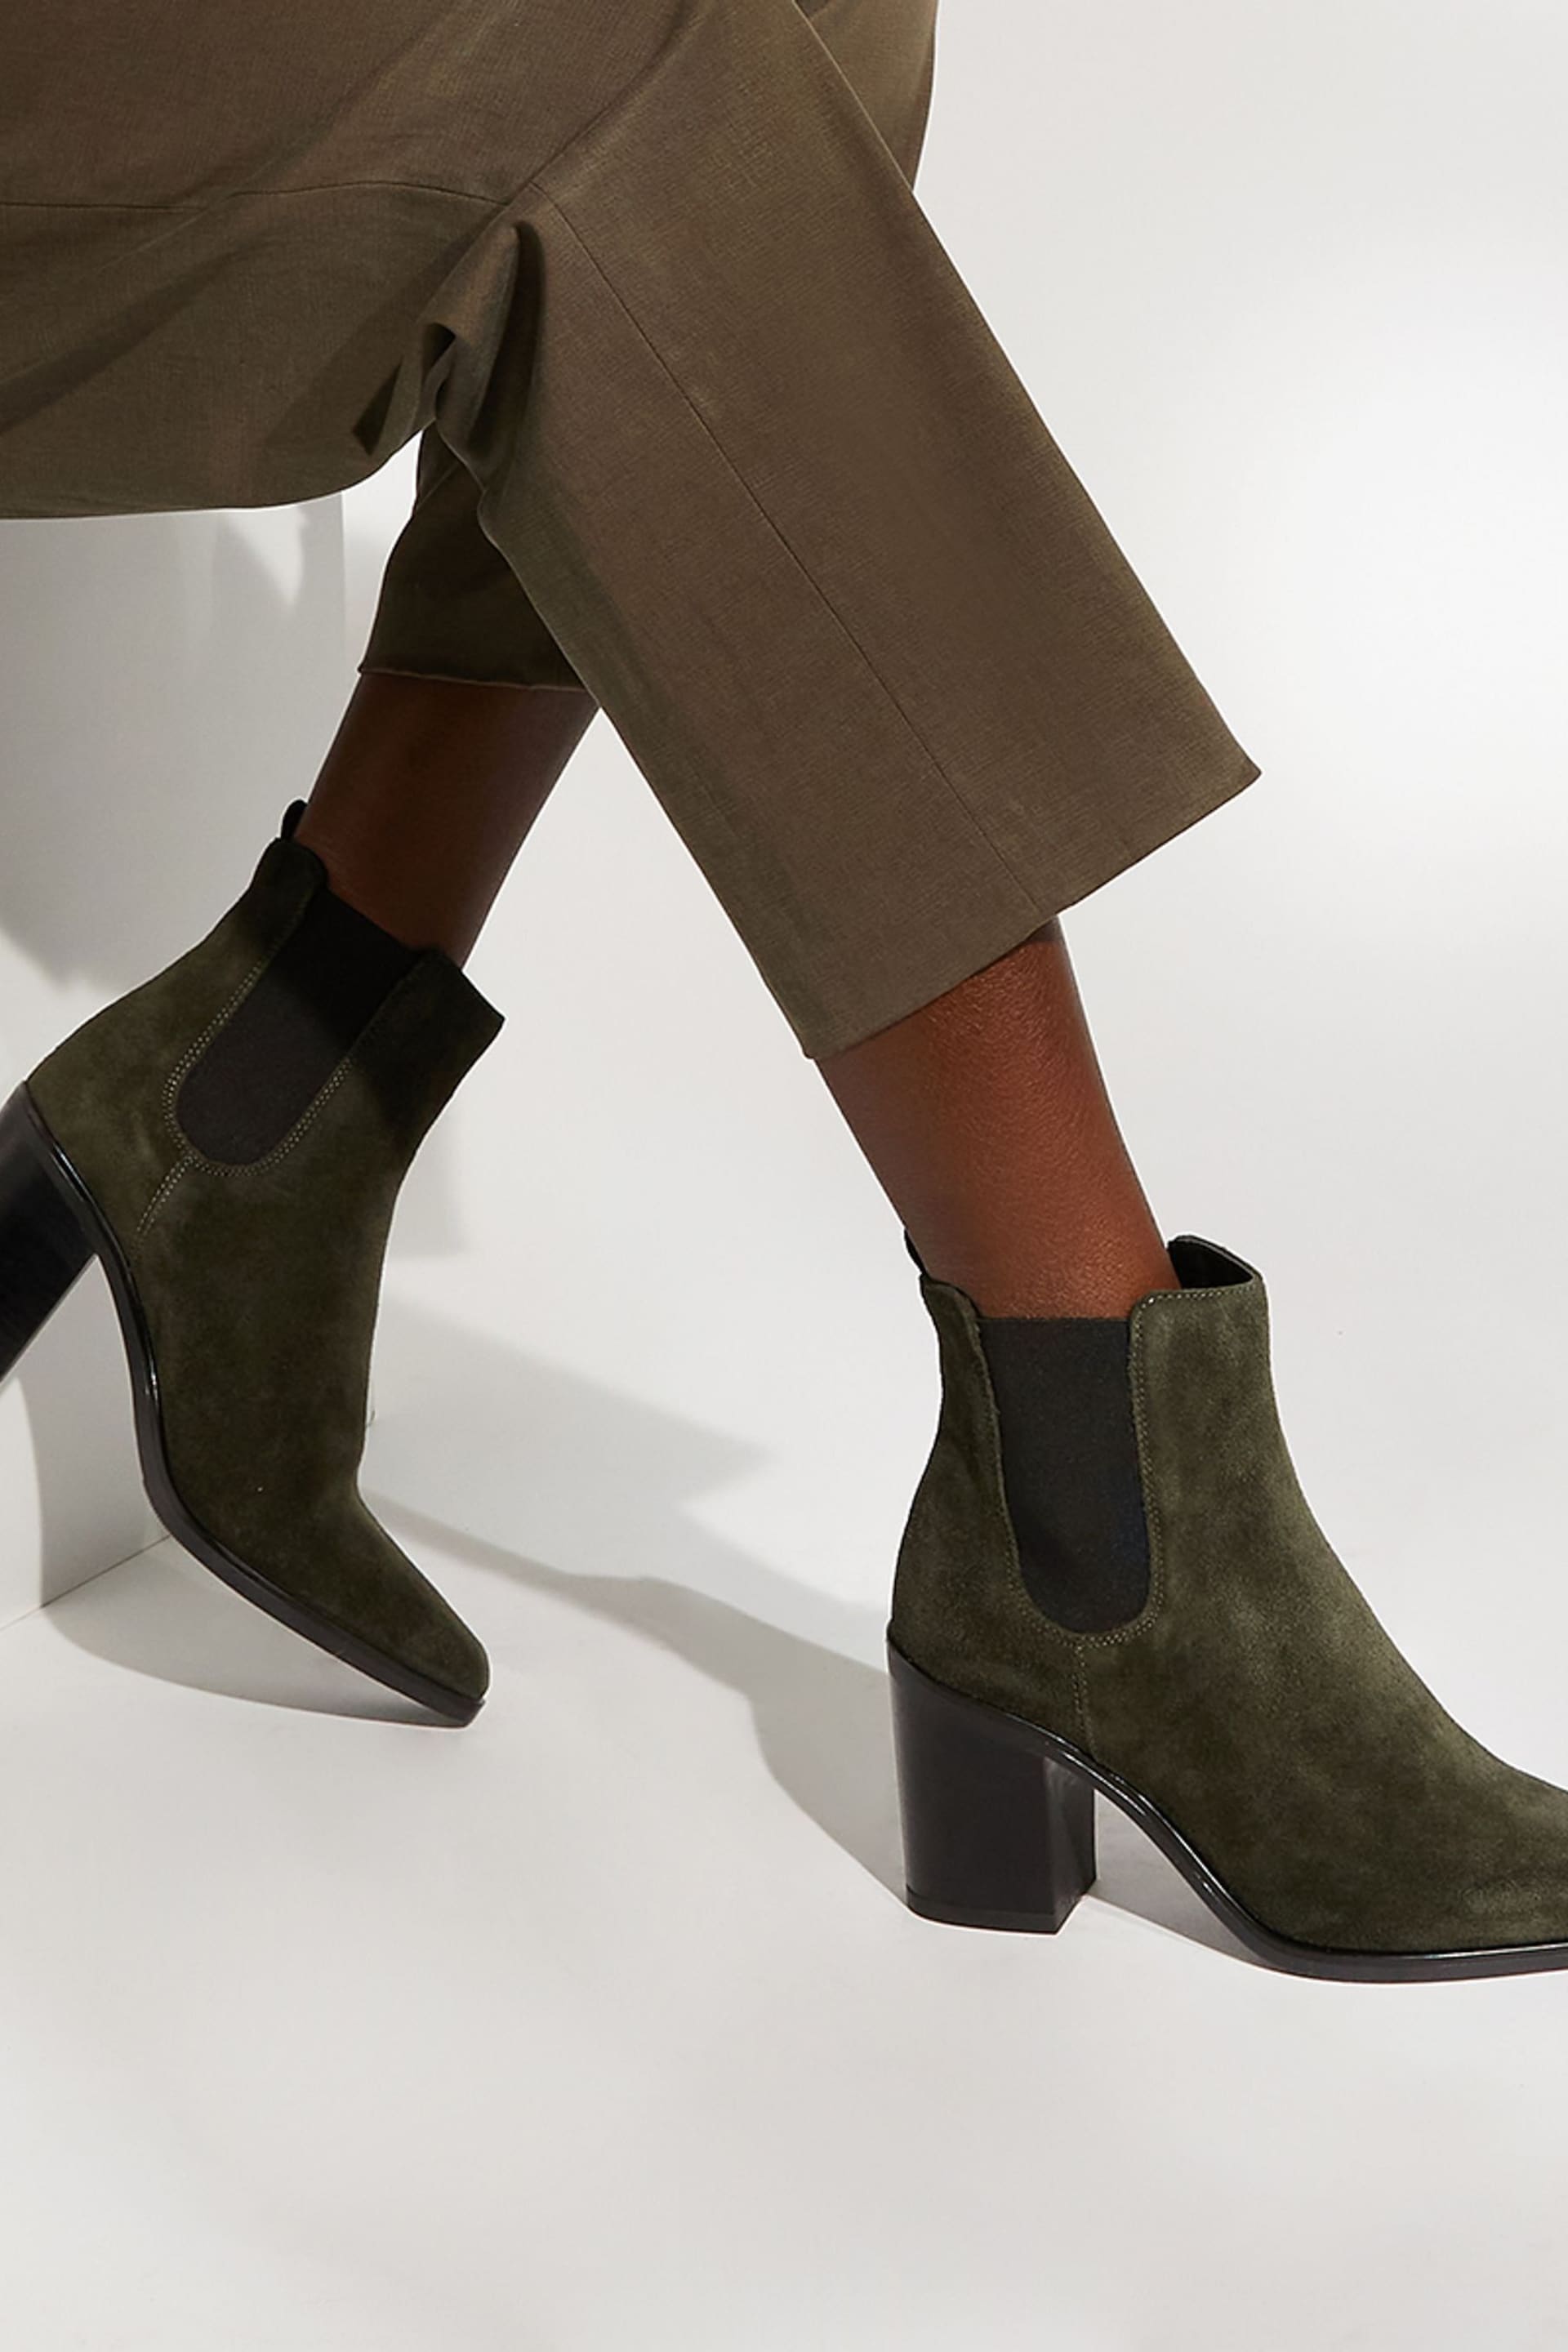 Dune London Green Prea High Western Chelsea Boots - Image 5 of 5